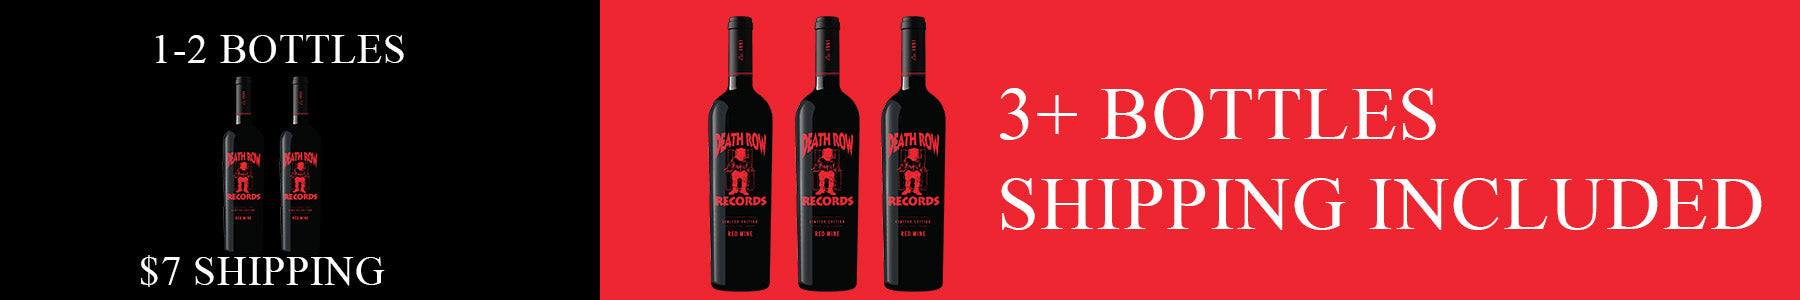 Death Row Records Wine Shipping Rates 1-2 bottles $7 3+ bottles shipping included